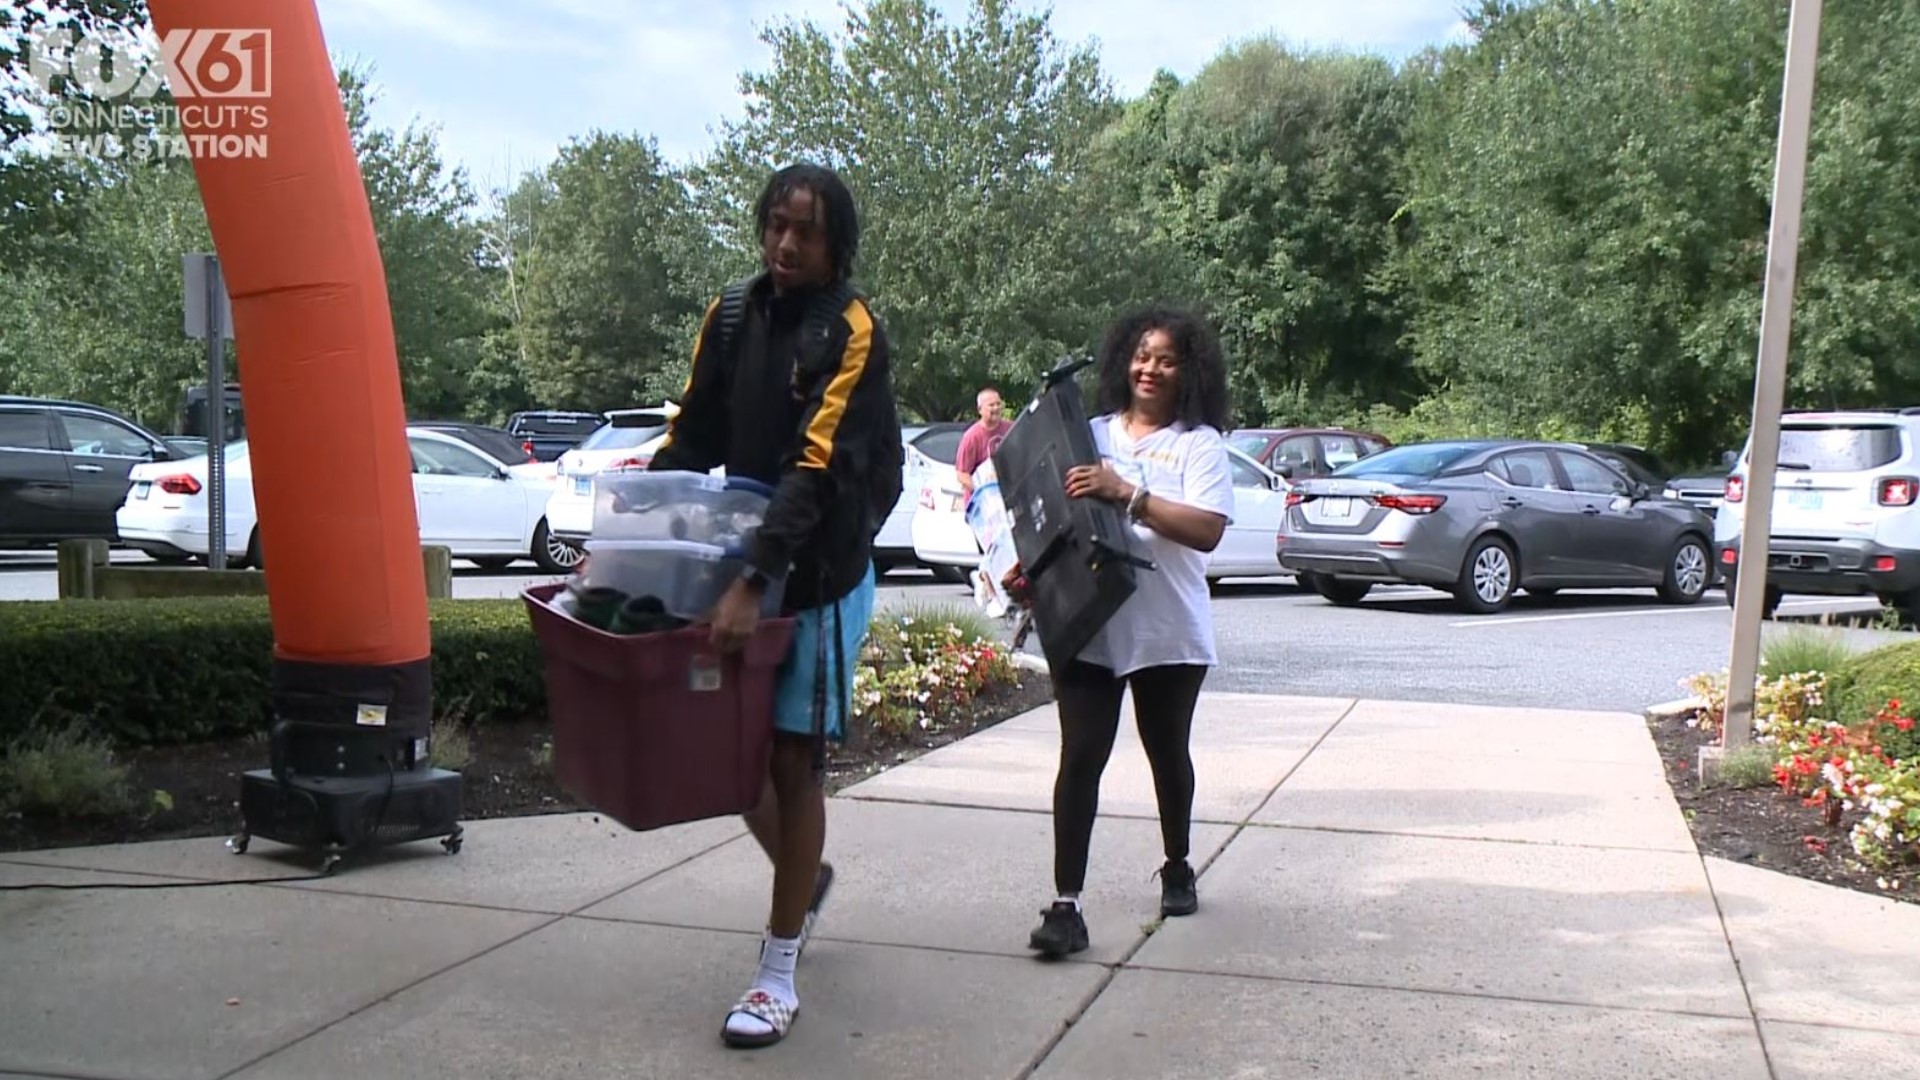 The day was full of new beginnings as students moved into their dorms at Post University.